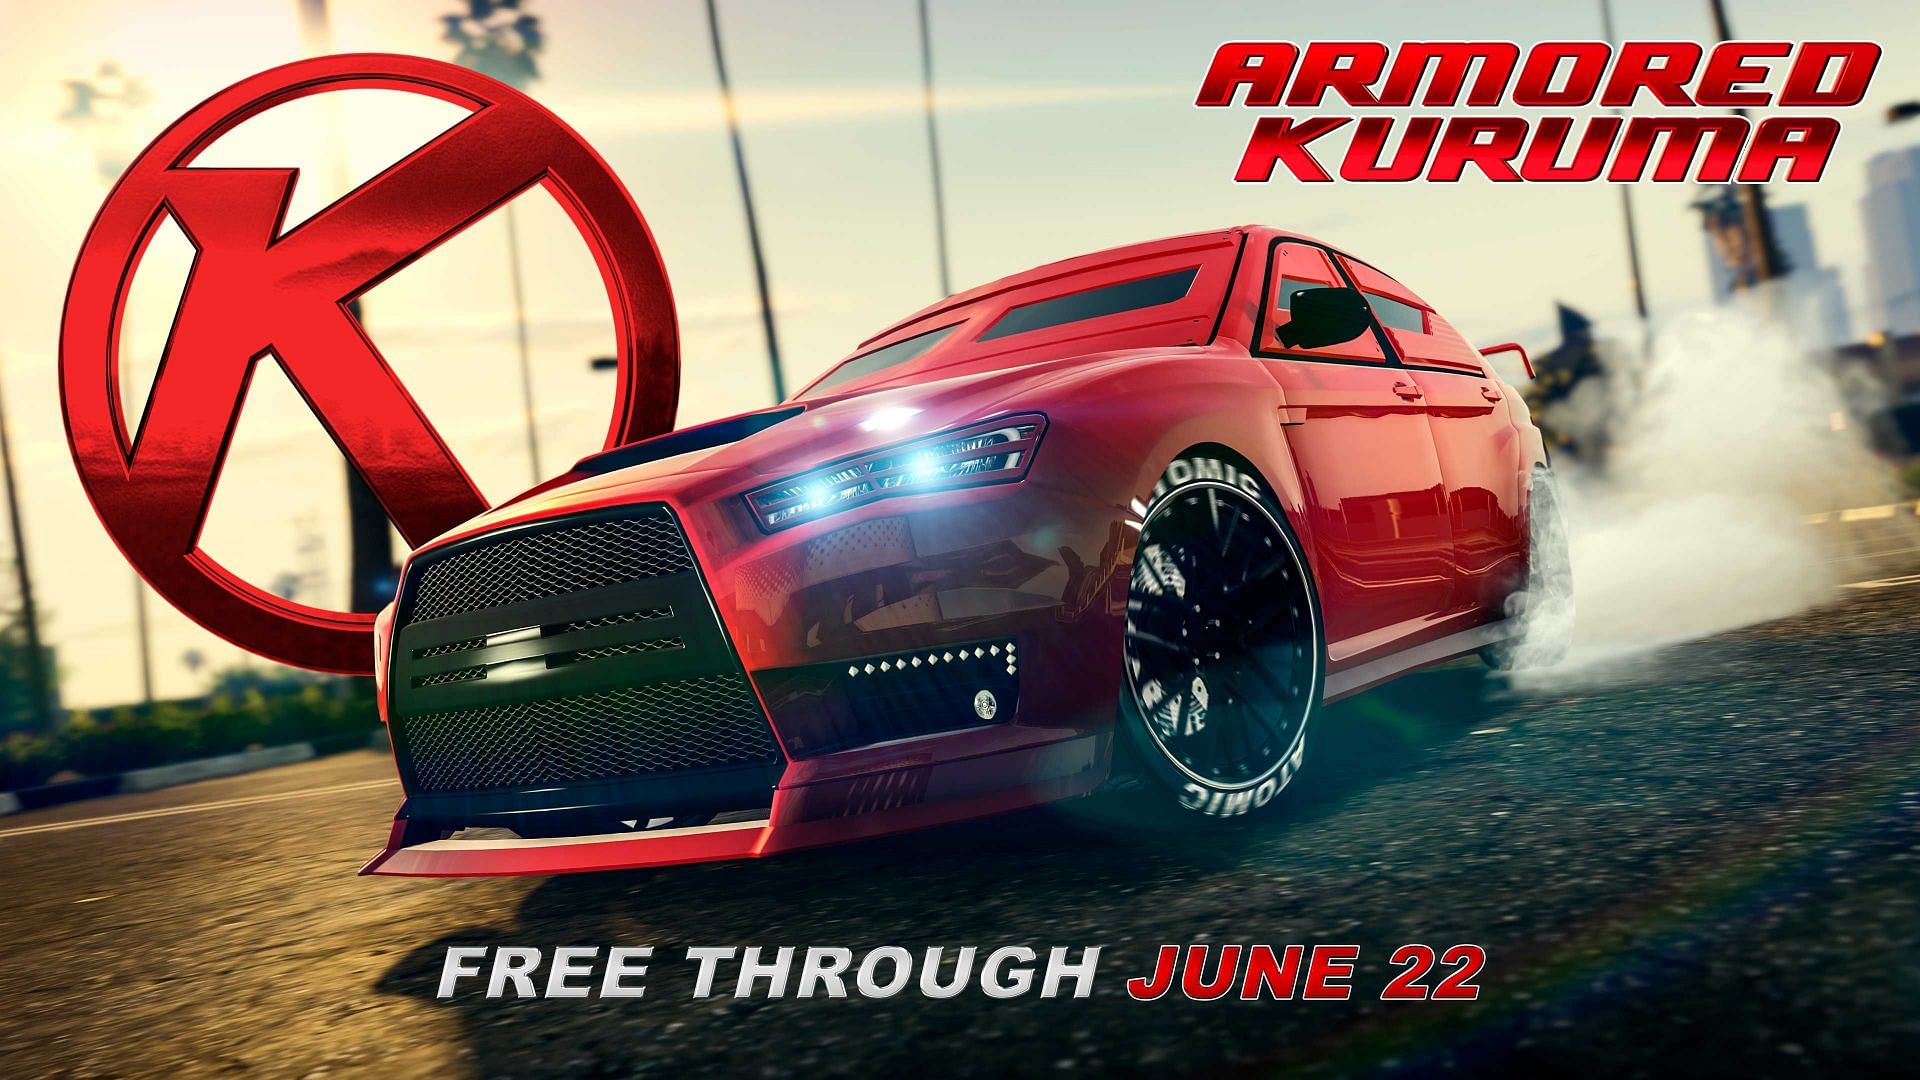 The advertisement for this free offer (Image via Rockstar Games)